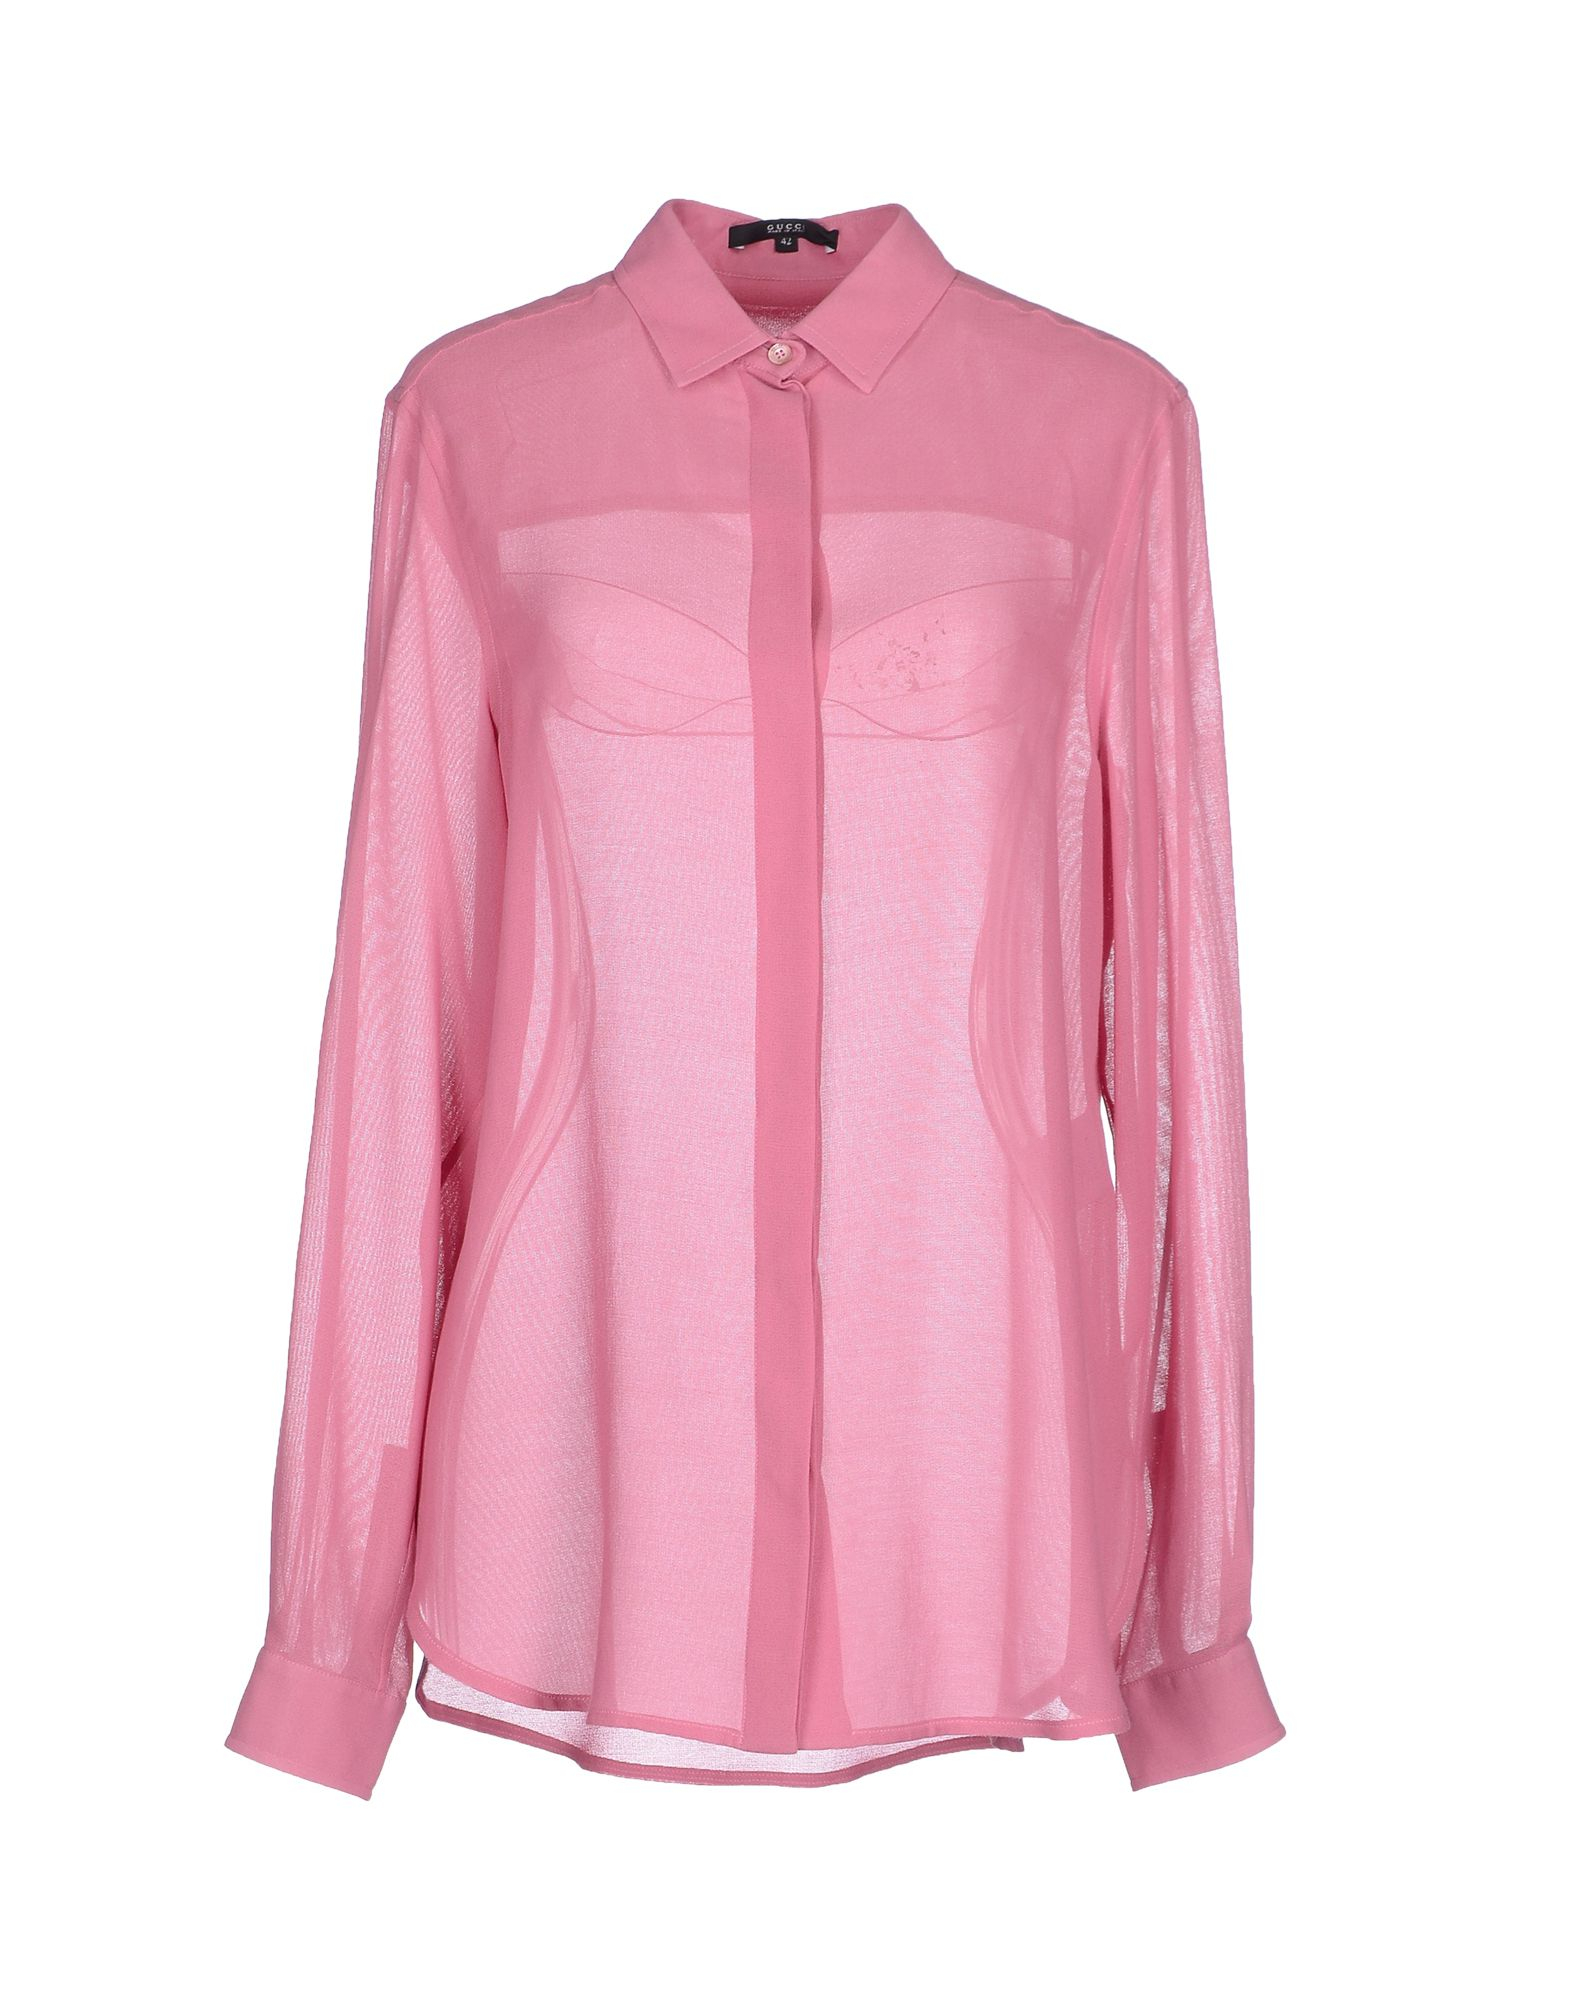 Lyst - Gucci Shirt in Pink